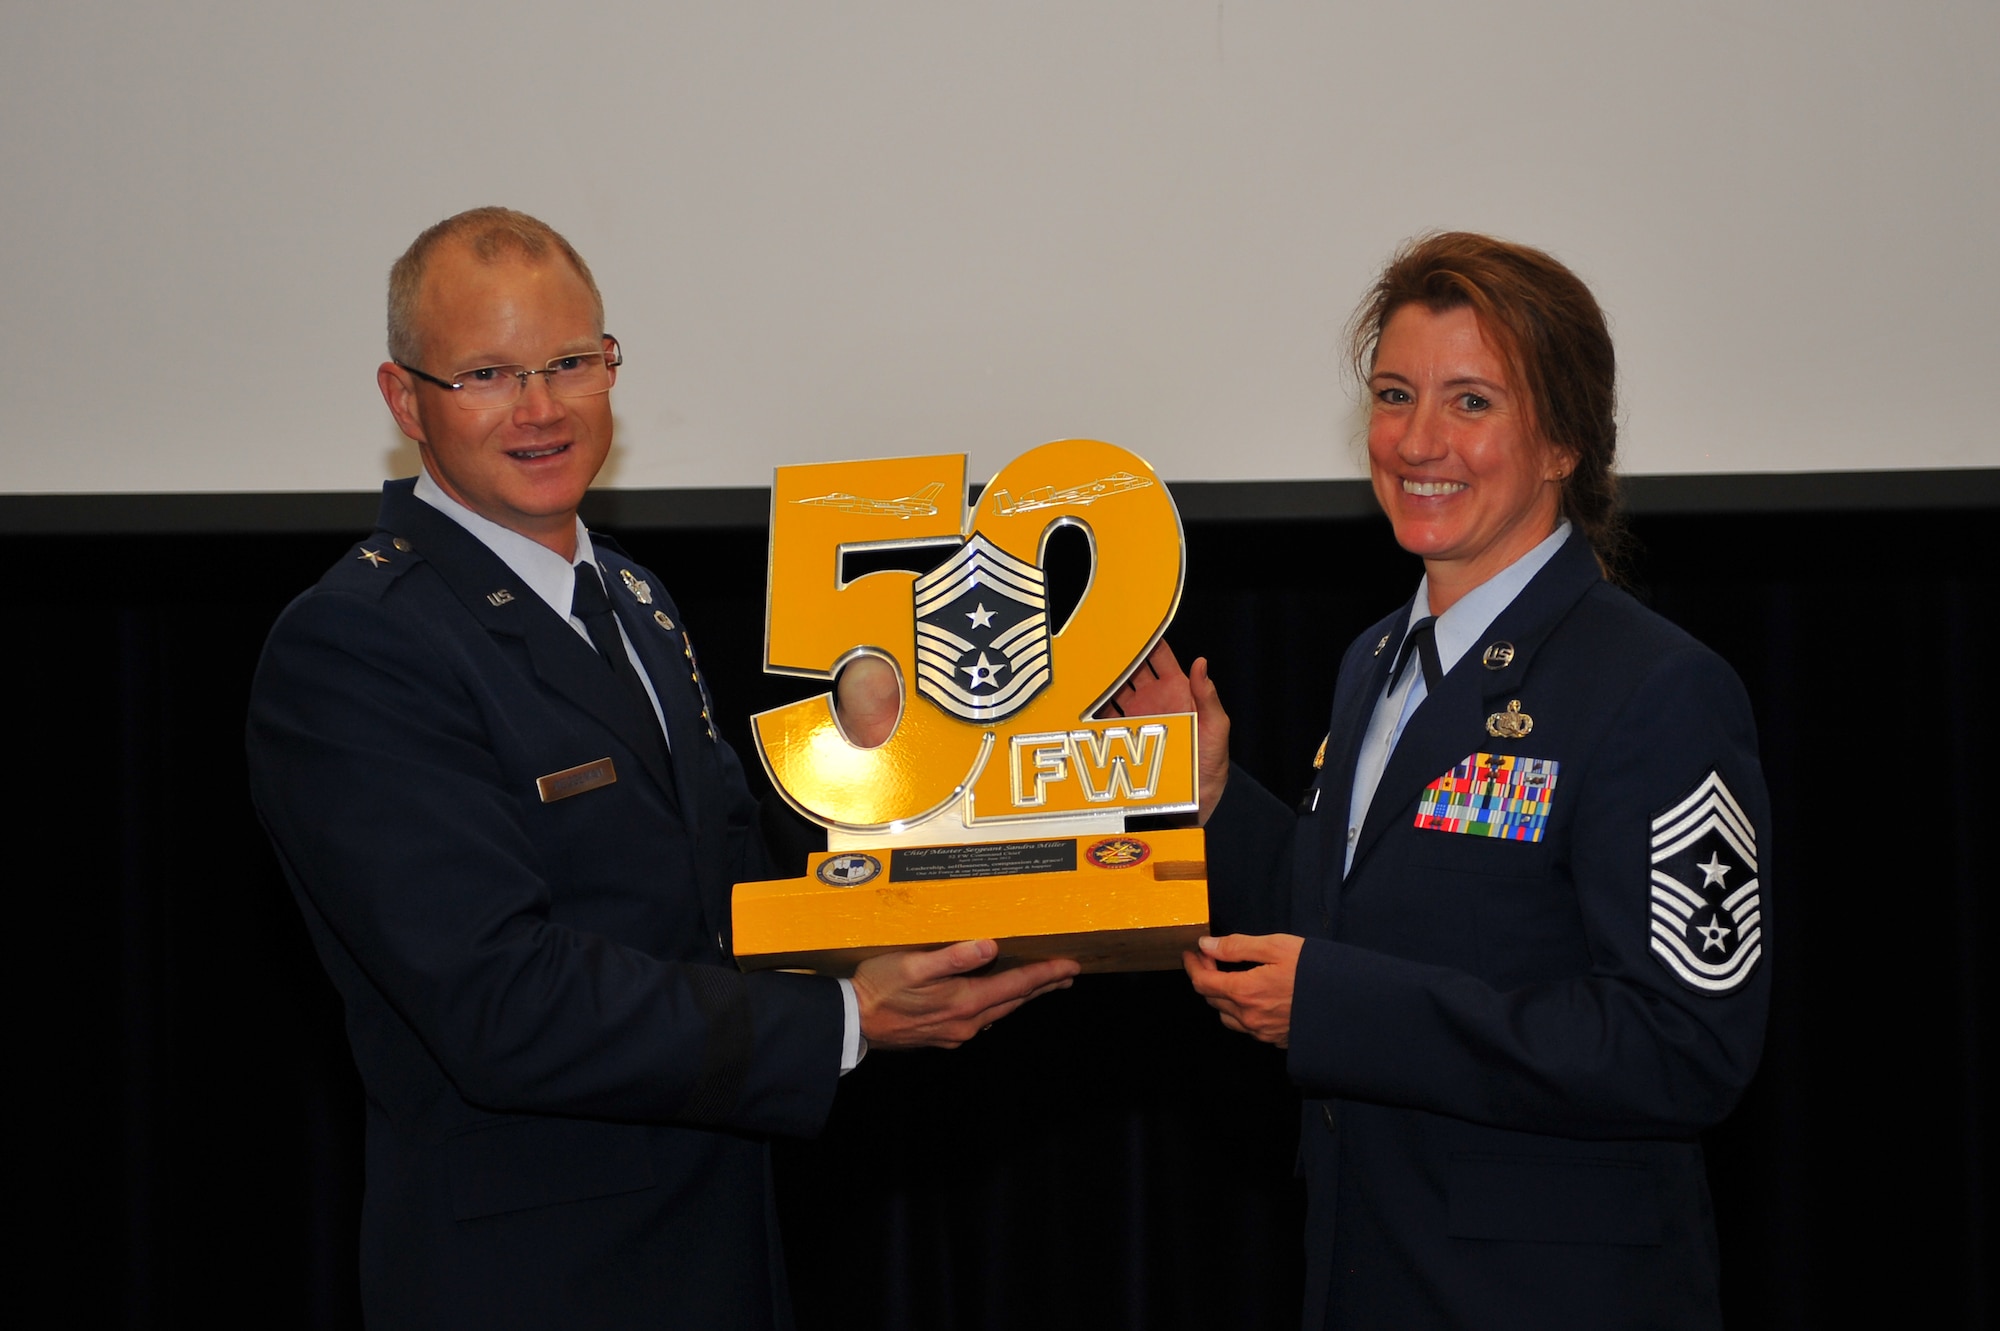 SPANGDAHLEM AIR BASE, Germany -- Brig. Gen. Chris Weggeman, left, 52nd Fighter Wing commander, presents a token of appreciation to Chief Master Sgt. Sandra Miller, 52nd FW command chief, during Miller’s retirement ceremony inside the Club Eifel ballroom here June 8. Miller retired after 29 years of service and more than 150 people attended the ceremony to celebrate her transition into civilian life. (U.S. Air Force photo by Airman 1st Class Dillon Davis/Released)